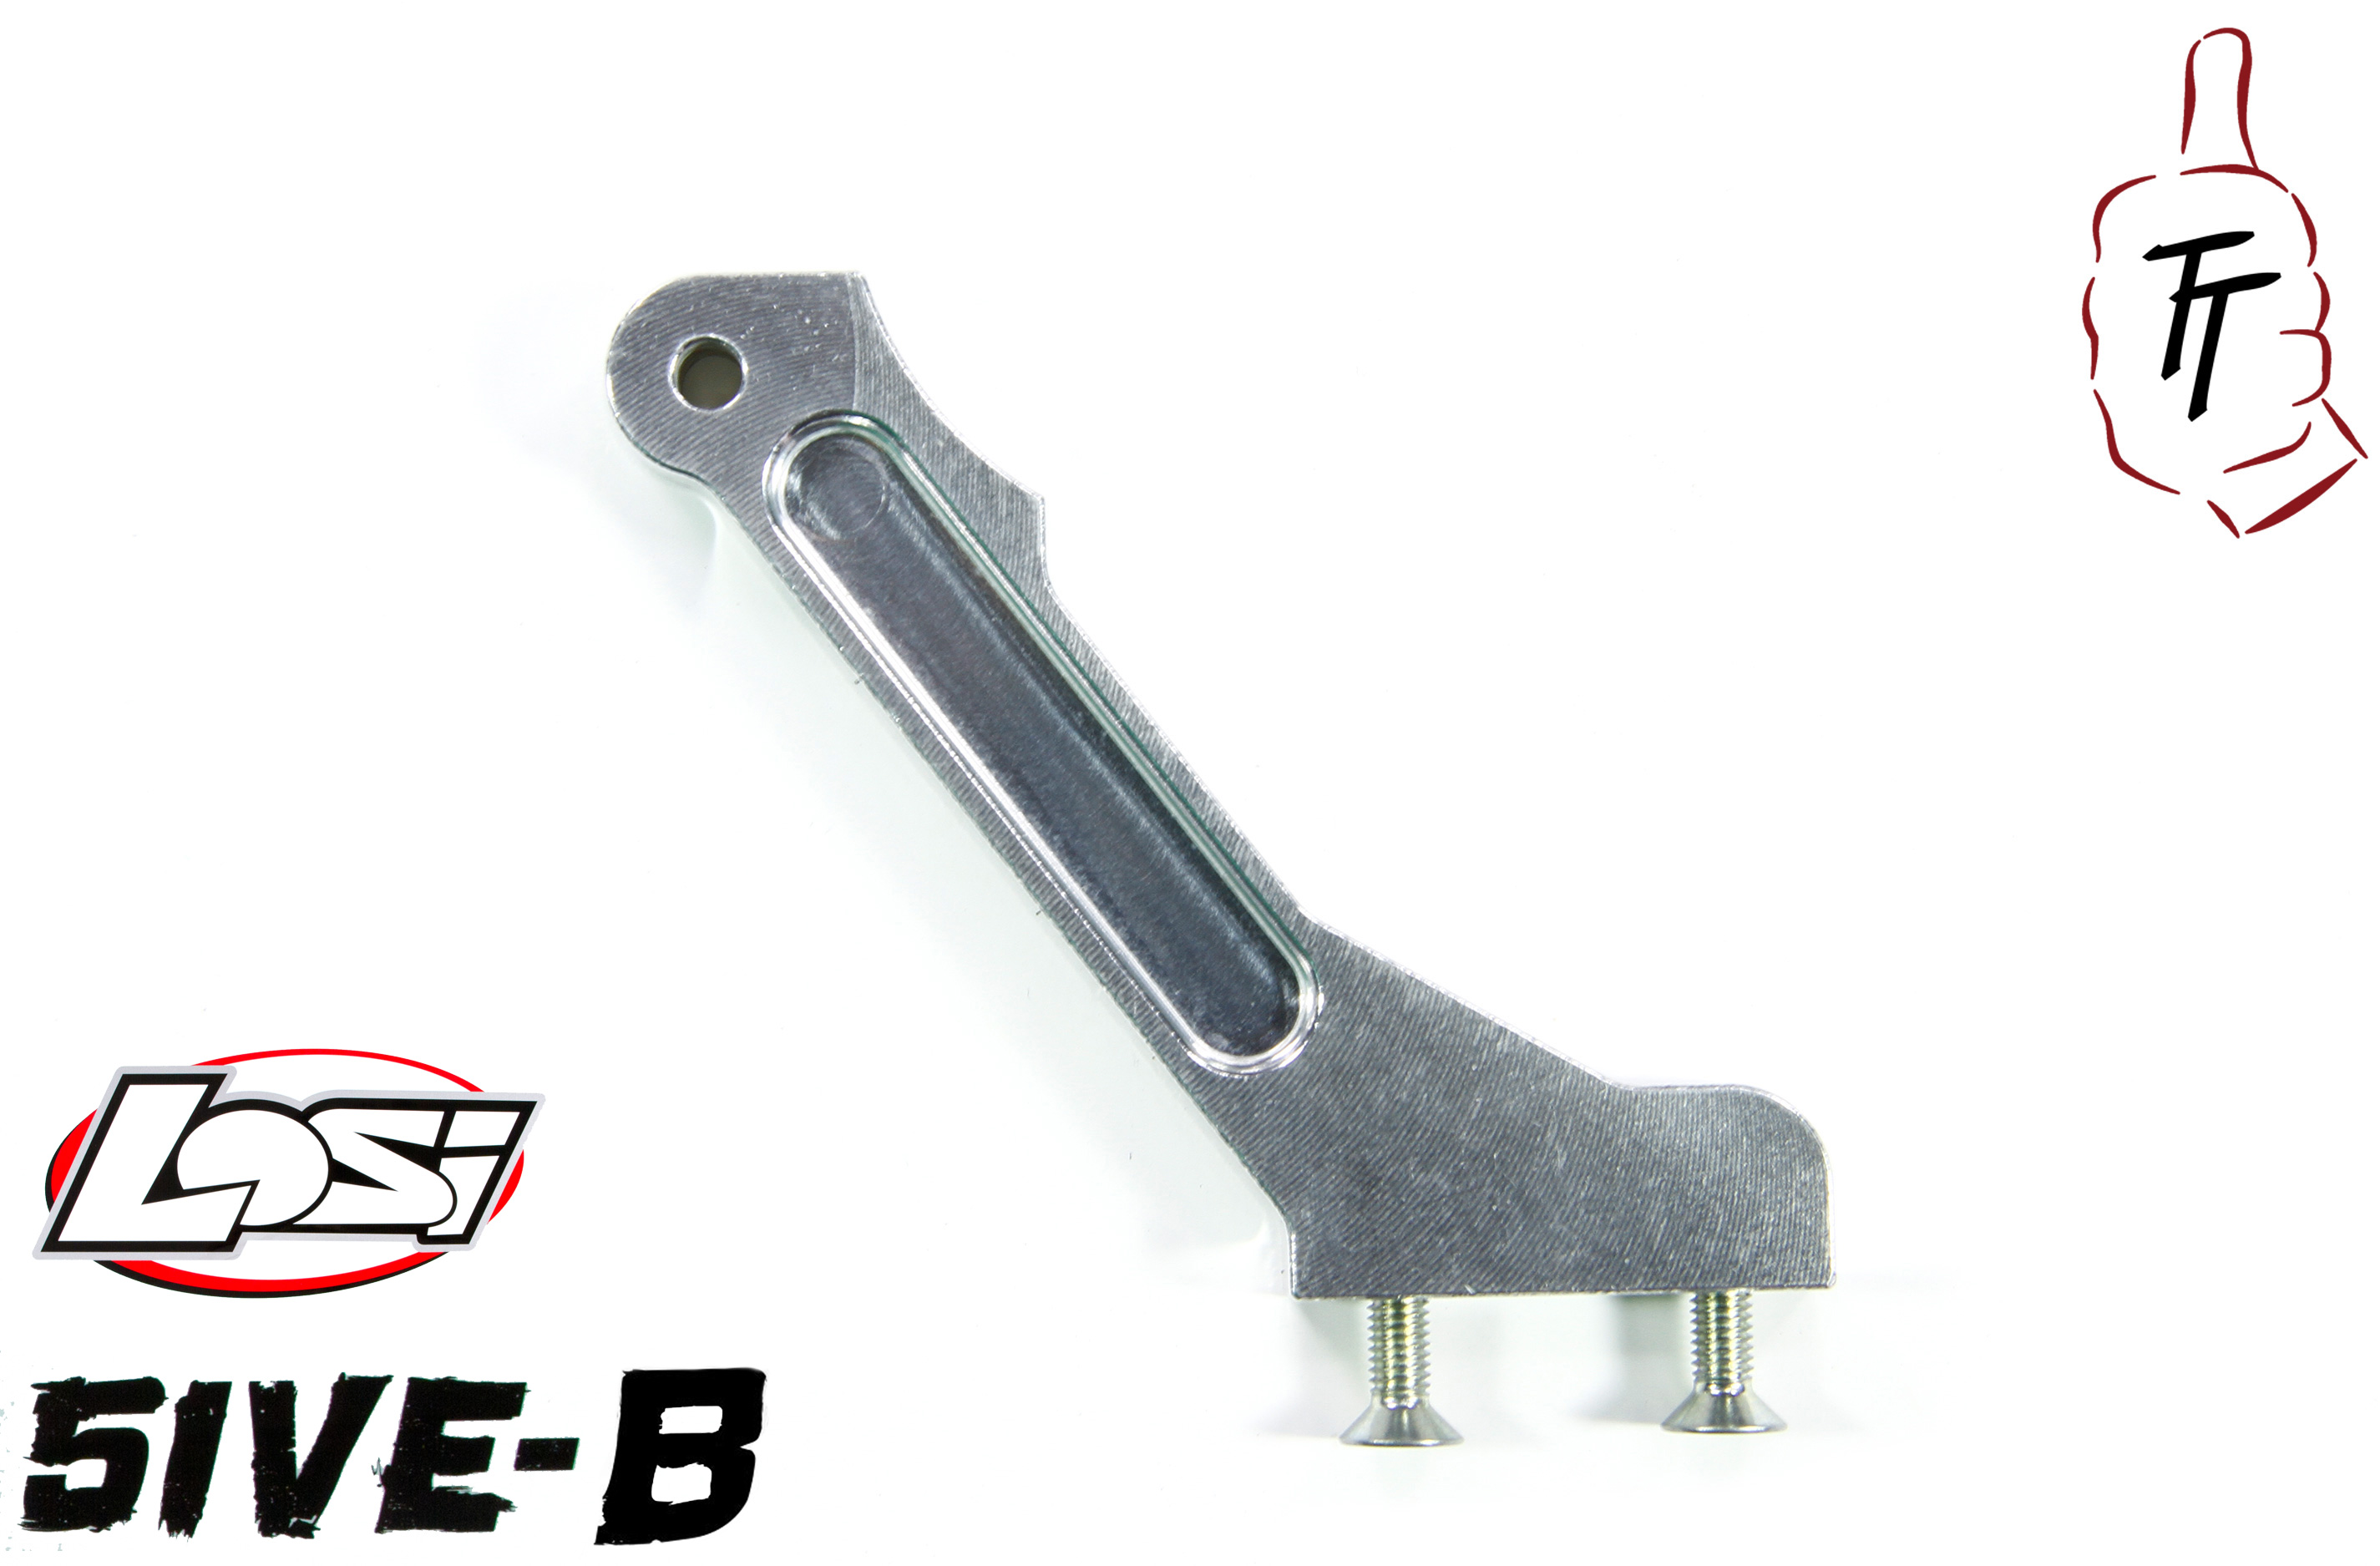 TT1003 Top Tuning hintere 7075 Alu-Chassisstrebe für TLR/Losi 5ive-B